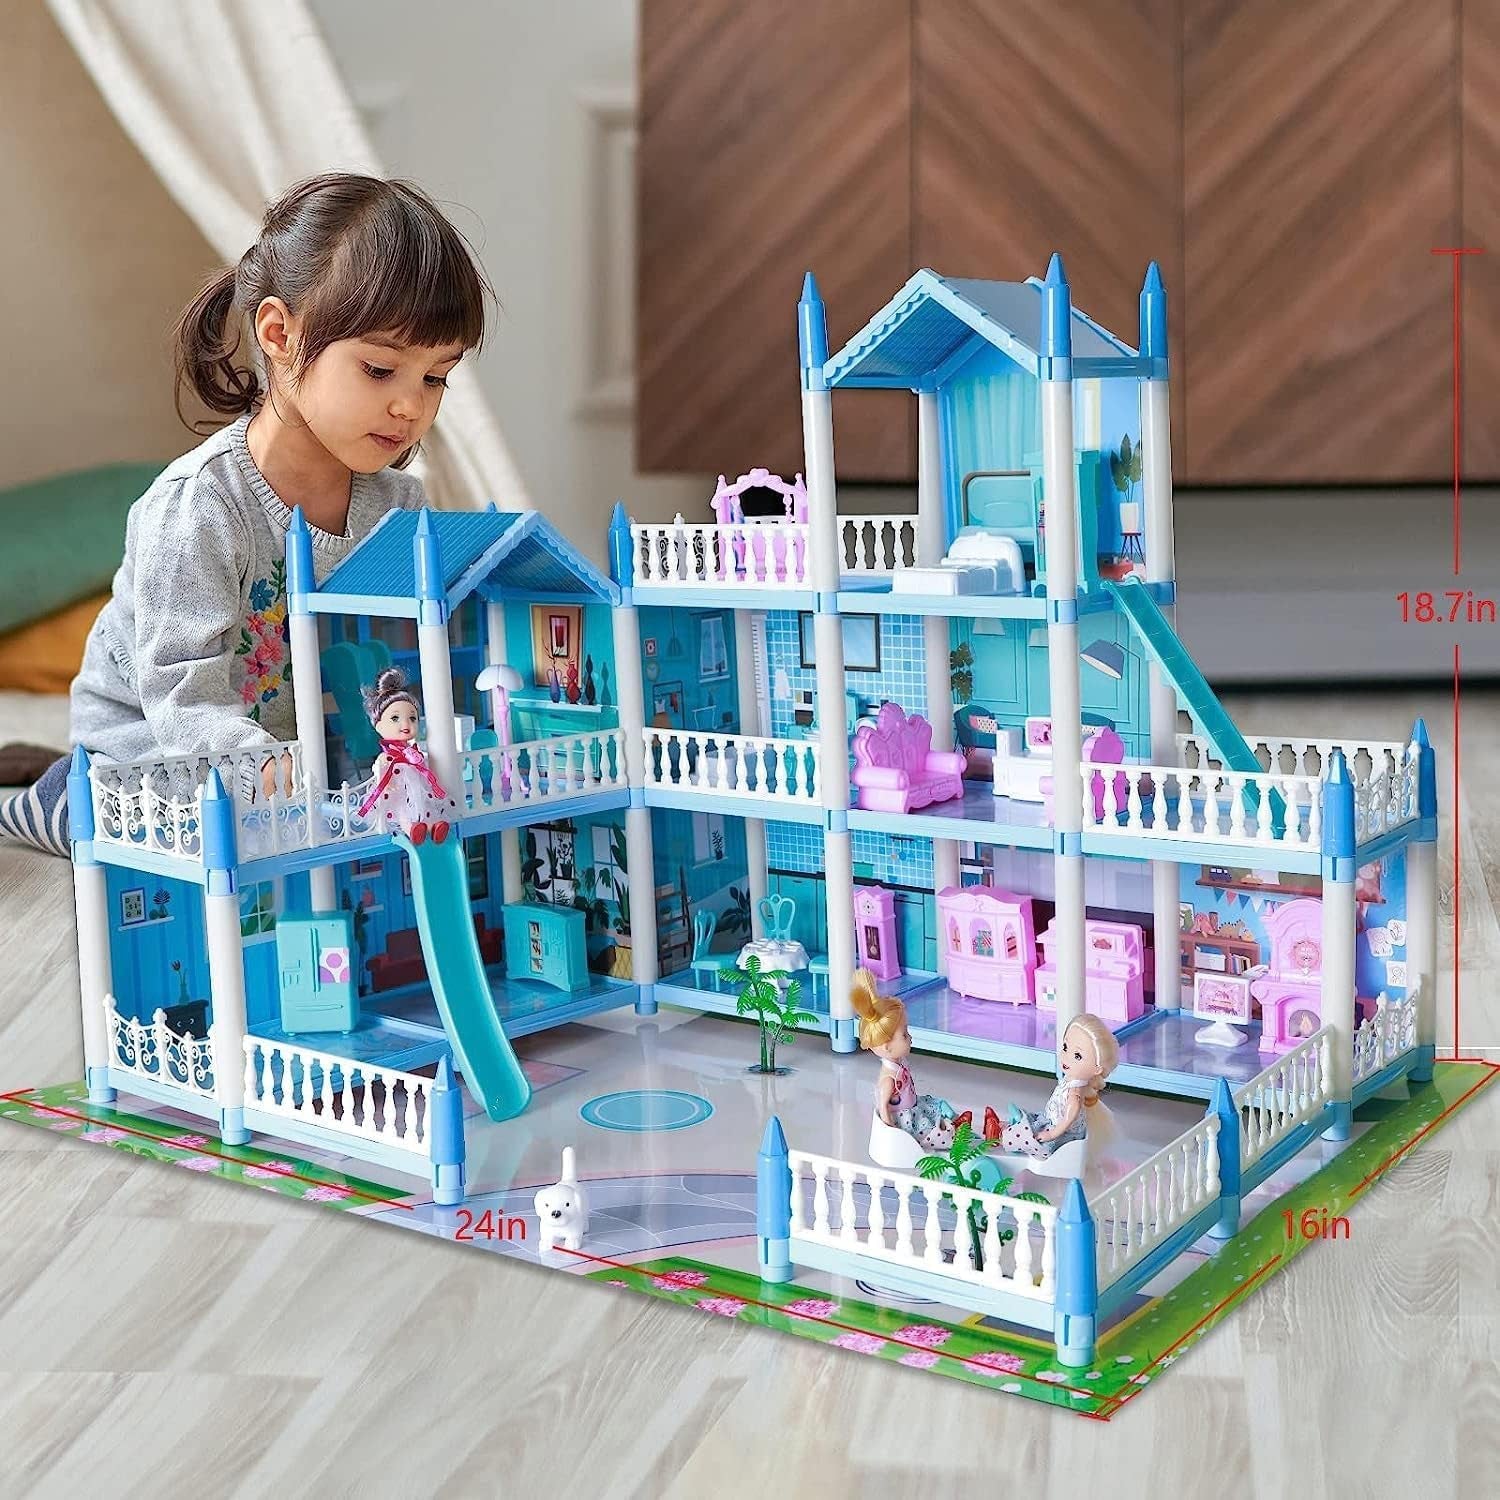 Blue 3-Story 9-Room Dollhouse with Flashing Lights, Furniture, and Dolls 